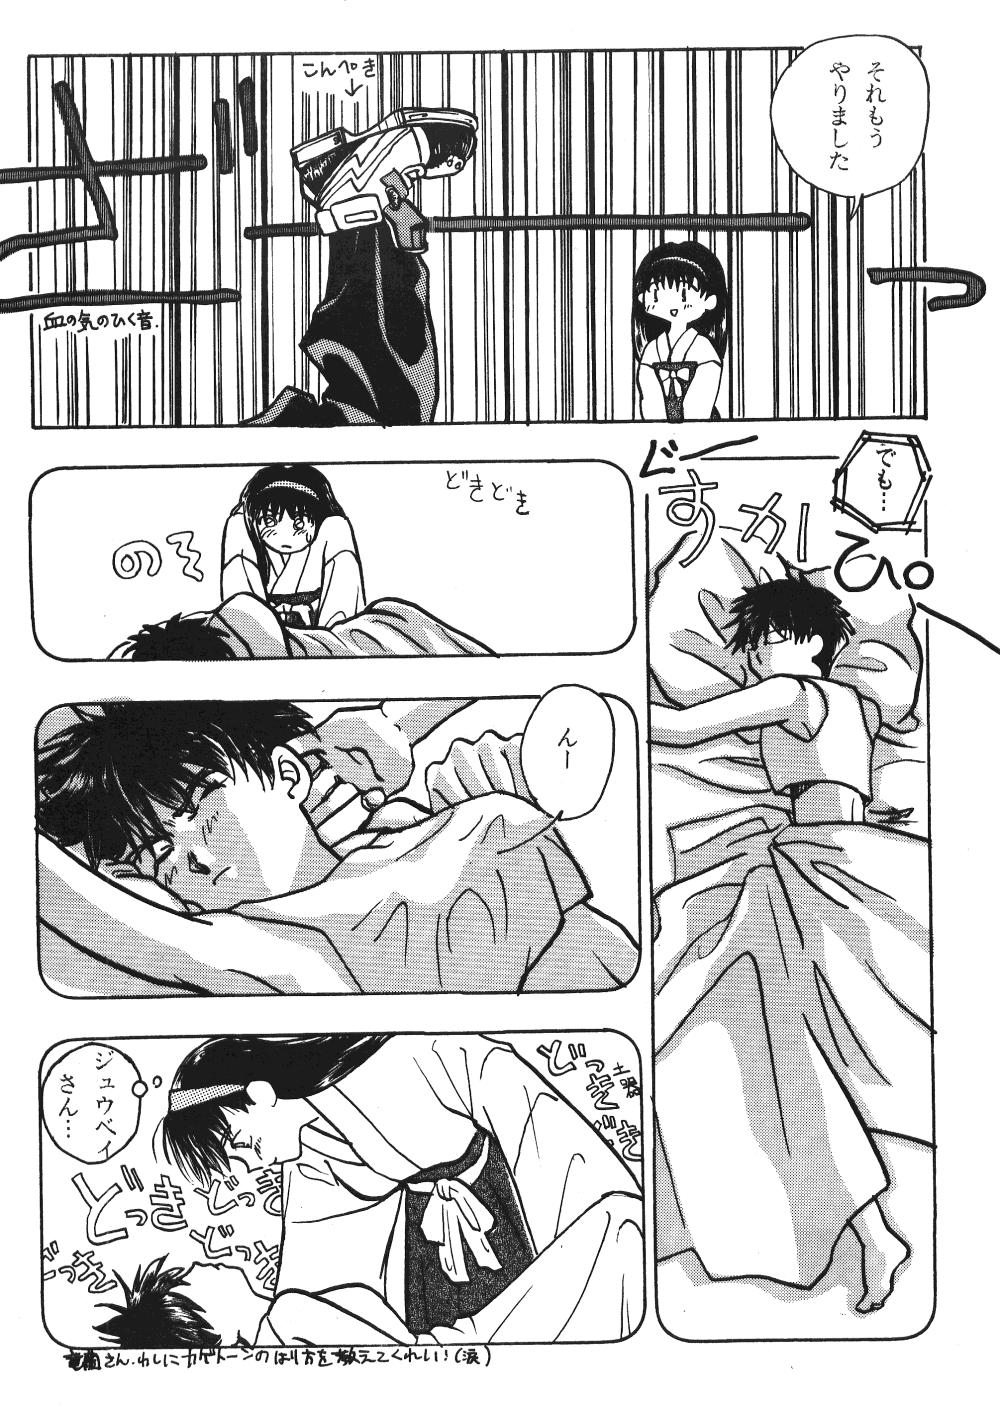 Magrinha Seinen Sunday - Street fighter Ranma 12 Ghost sweeper mikami Girl - Page 11